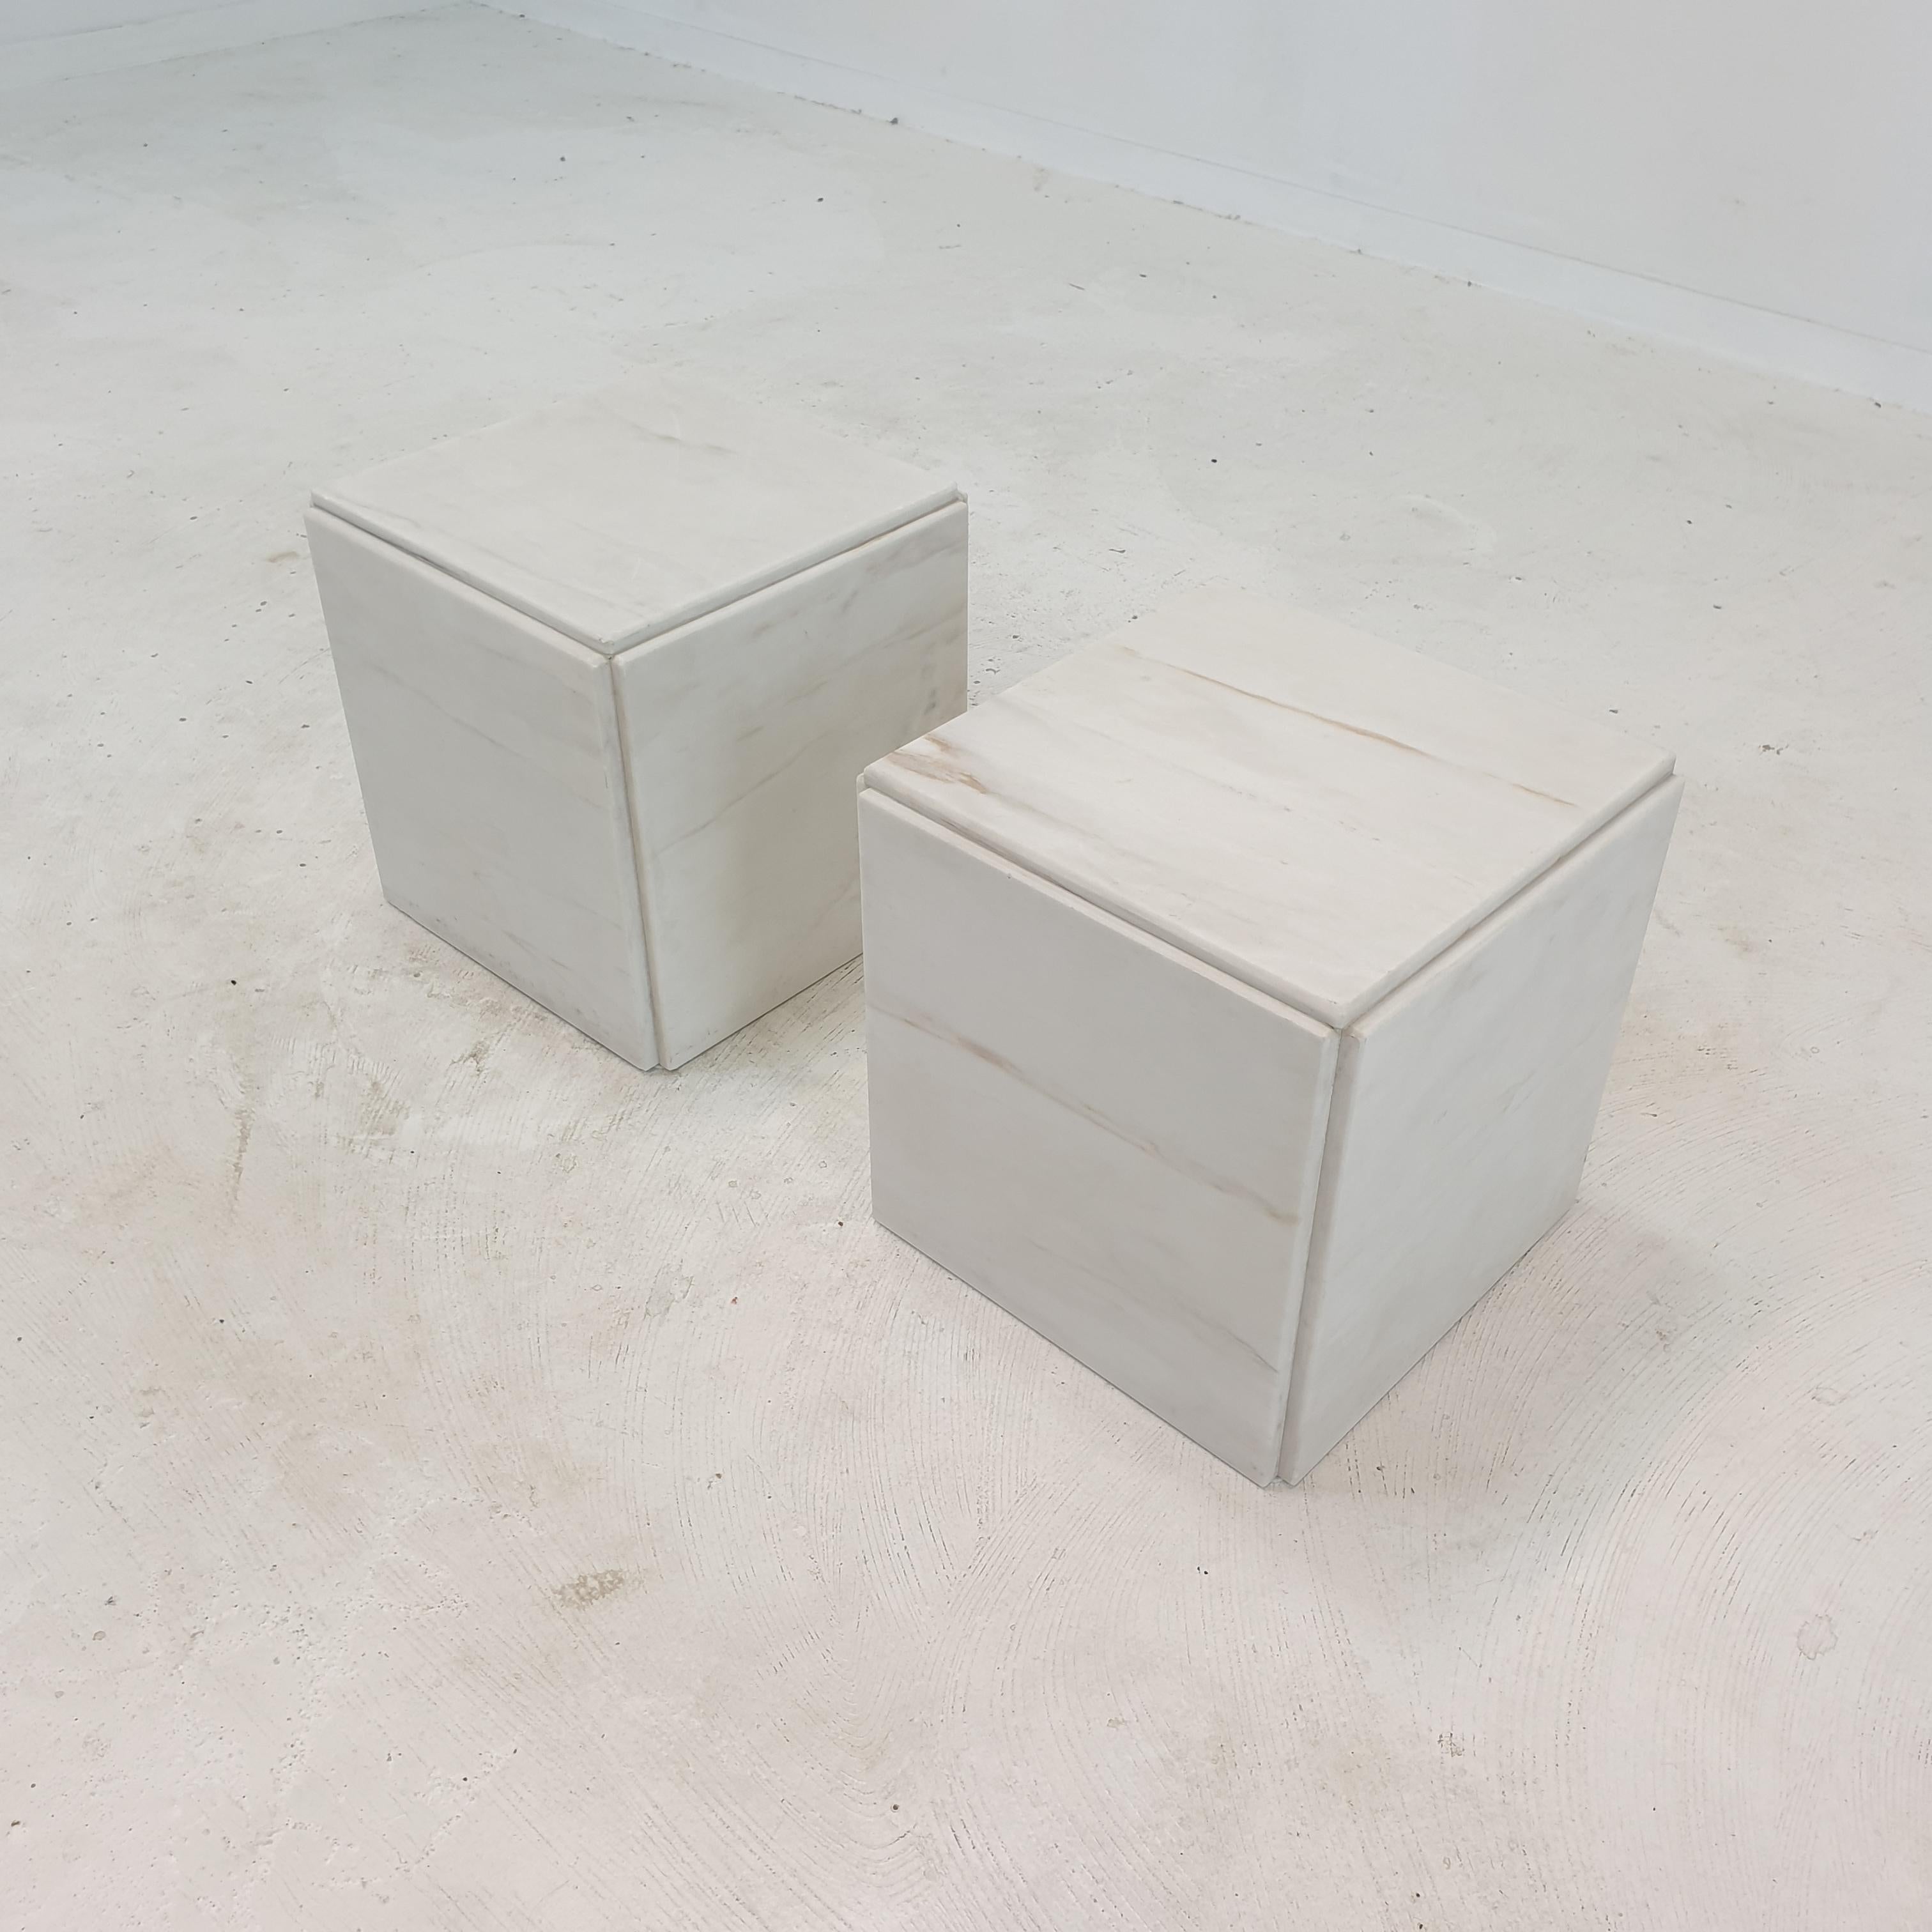 Carrara Marble Set of 2 Italian Marble Pedestals or Side Tables, 1980's For Sale